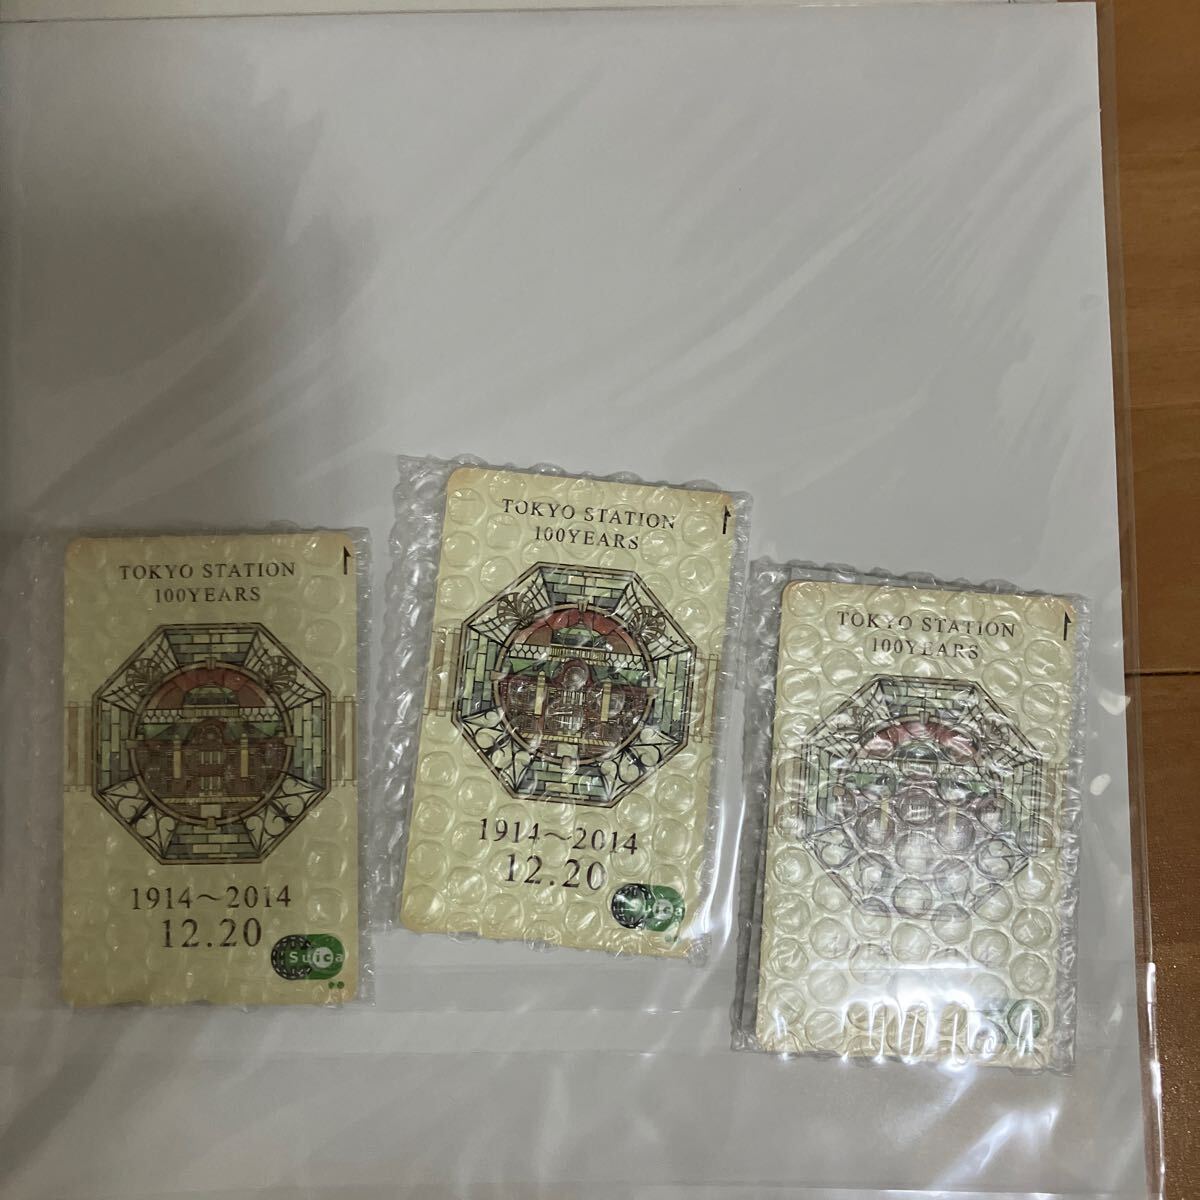  Tokyo station opening 100 anniversary commemoration Suica3 pieces set unopened 